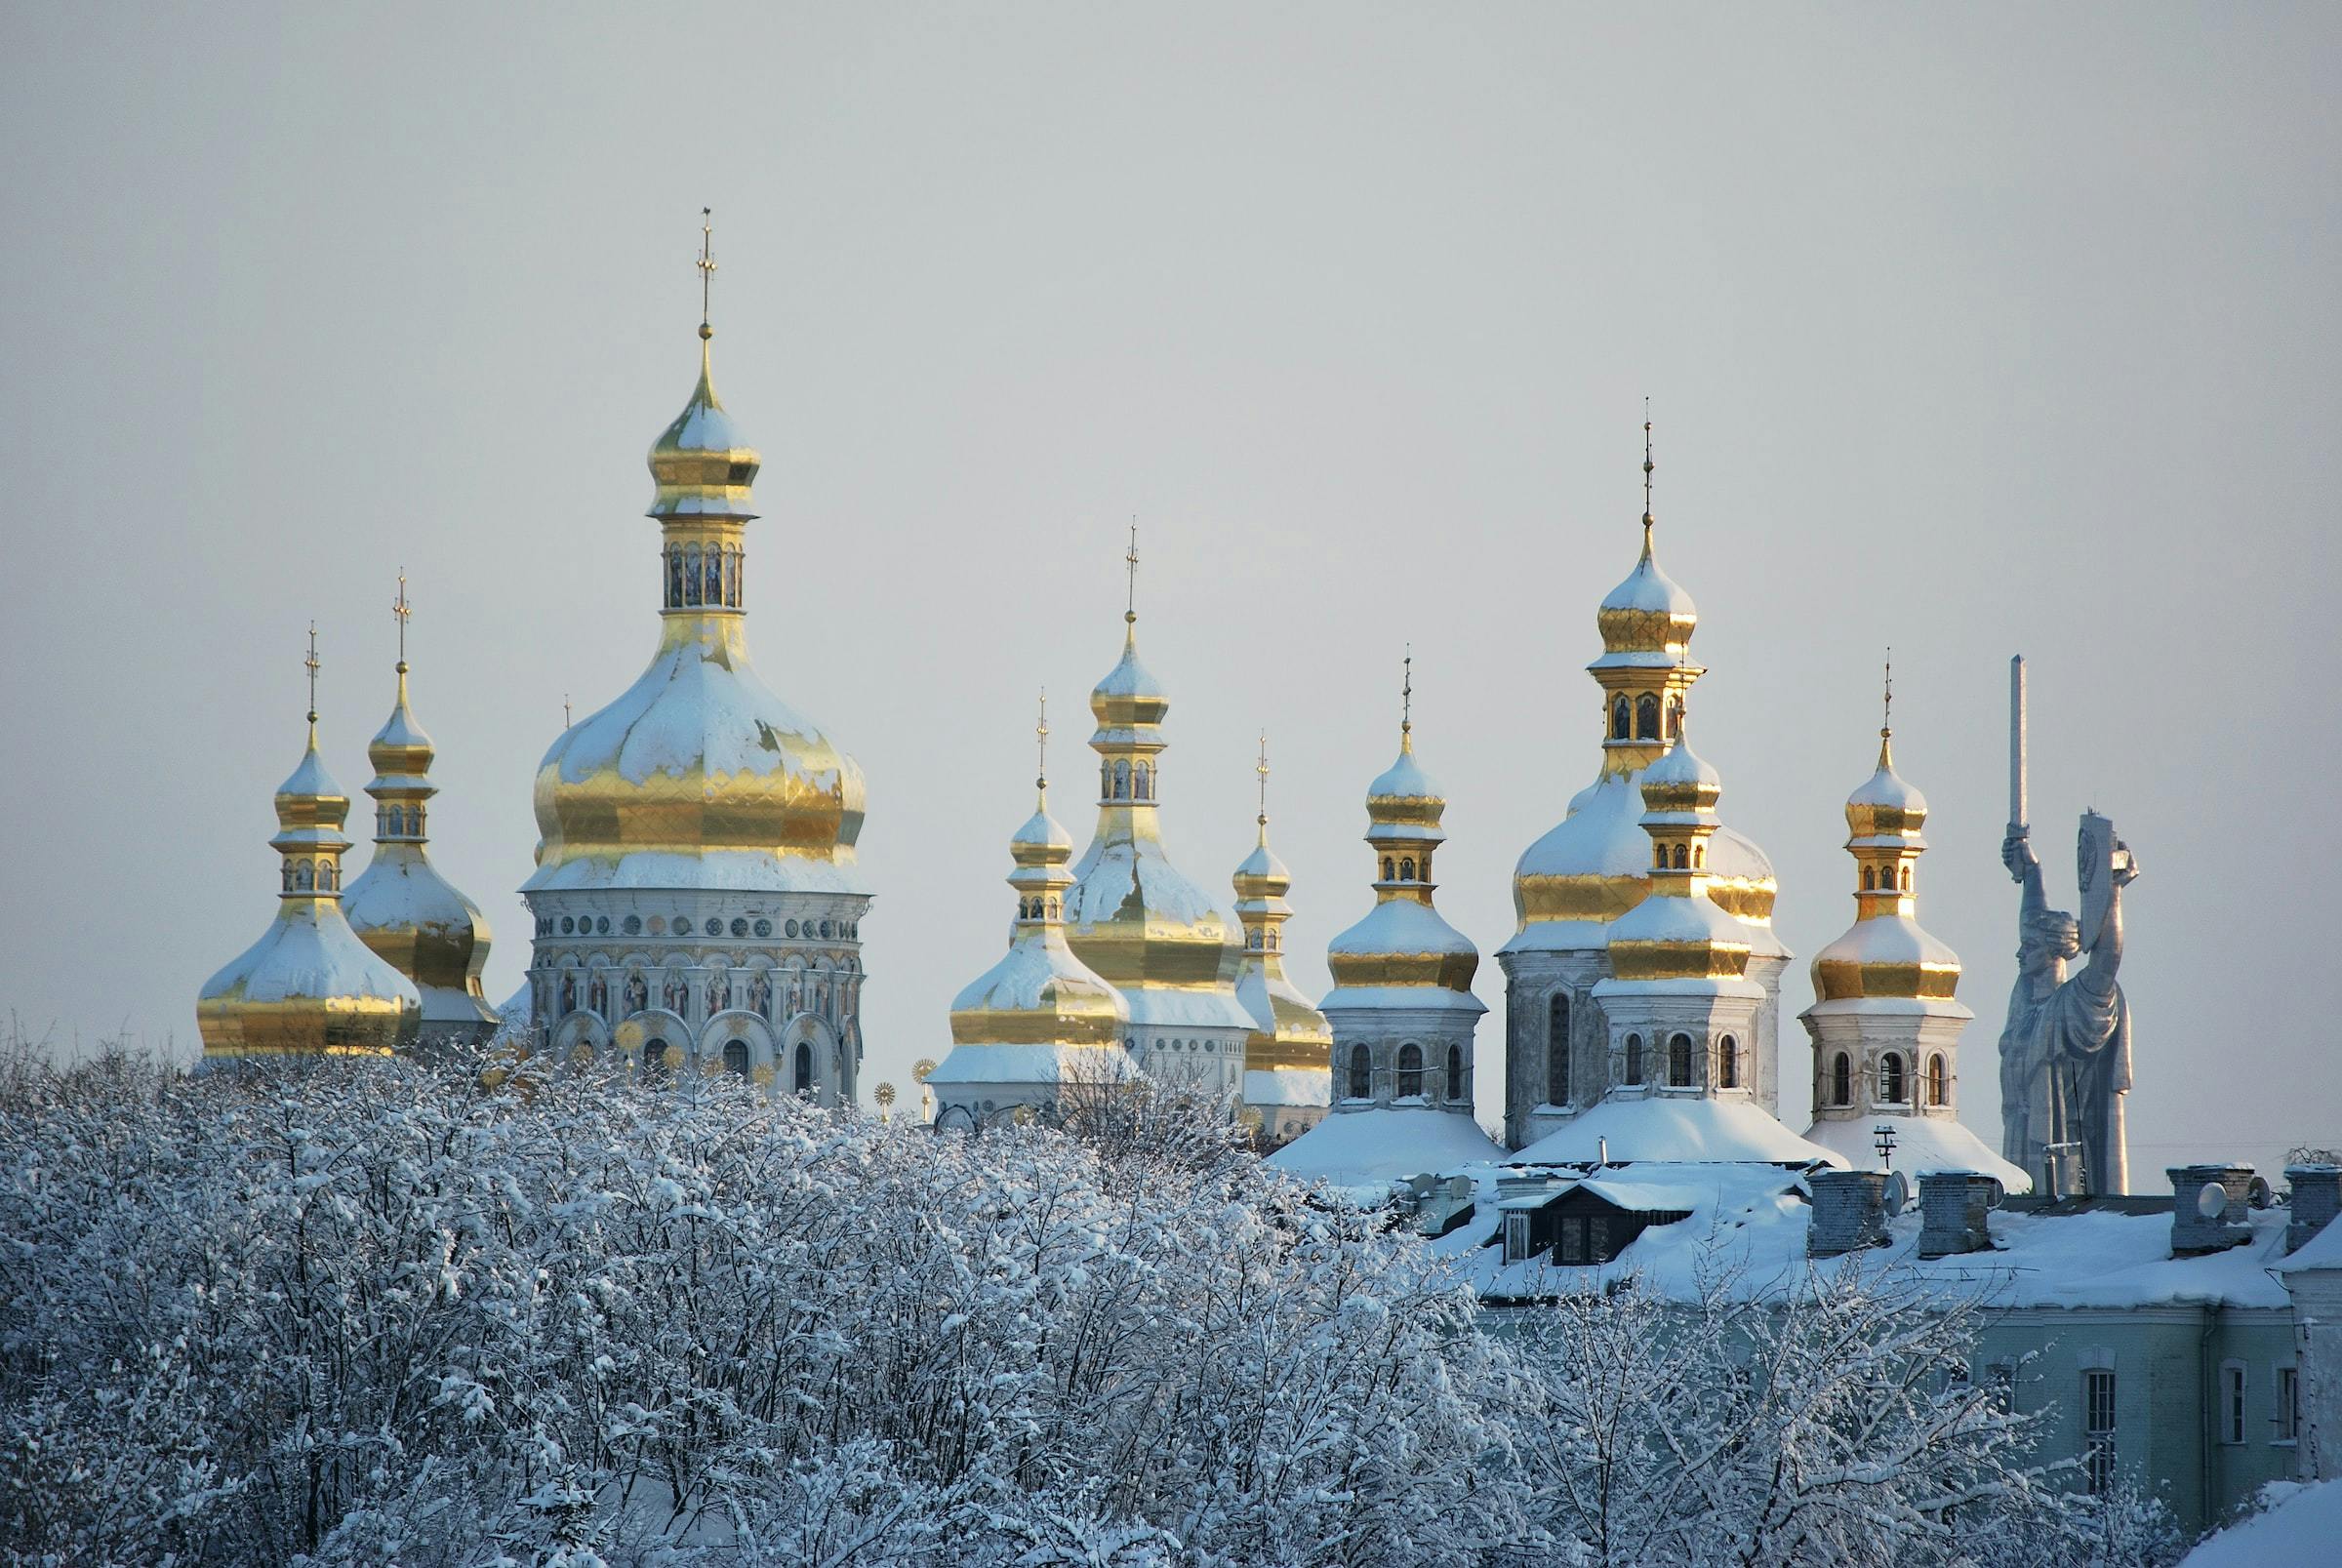 Domes of the Kyiv Pechersk Lavra in winter